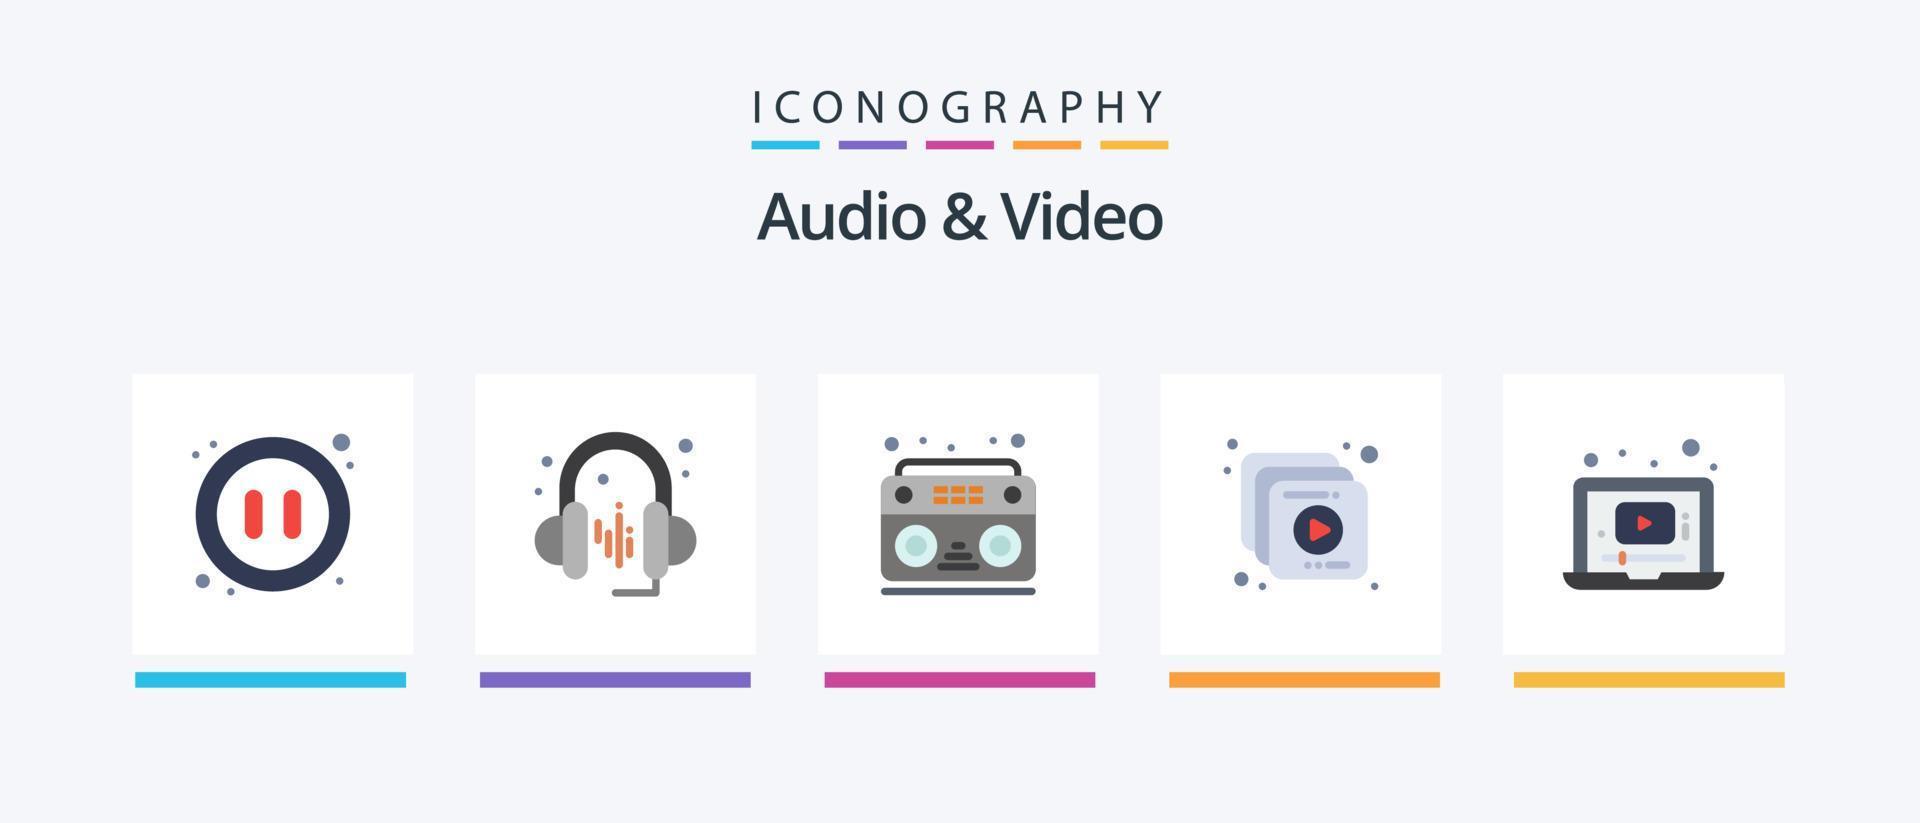 Audio And Video Flat 5 Icon Pack Including music. video. music. laptop. multimedia. Creative Icons Design vector